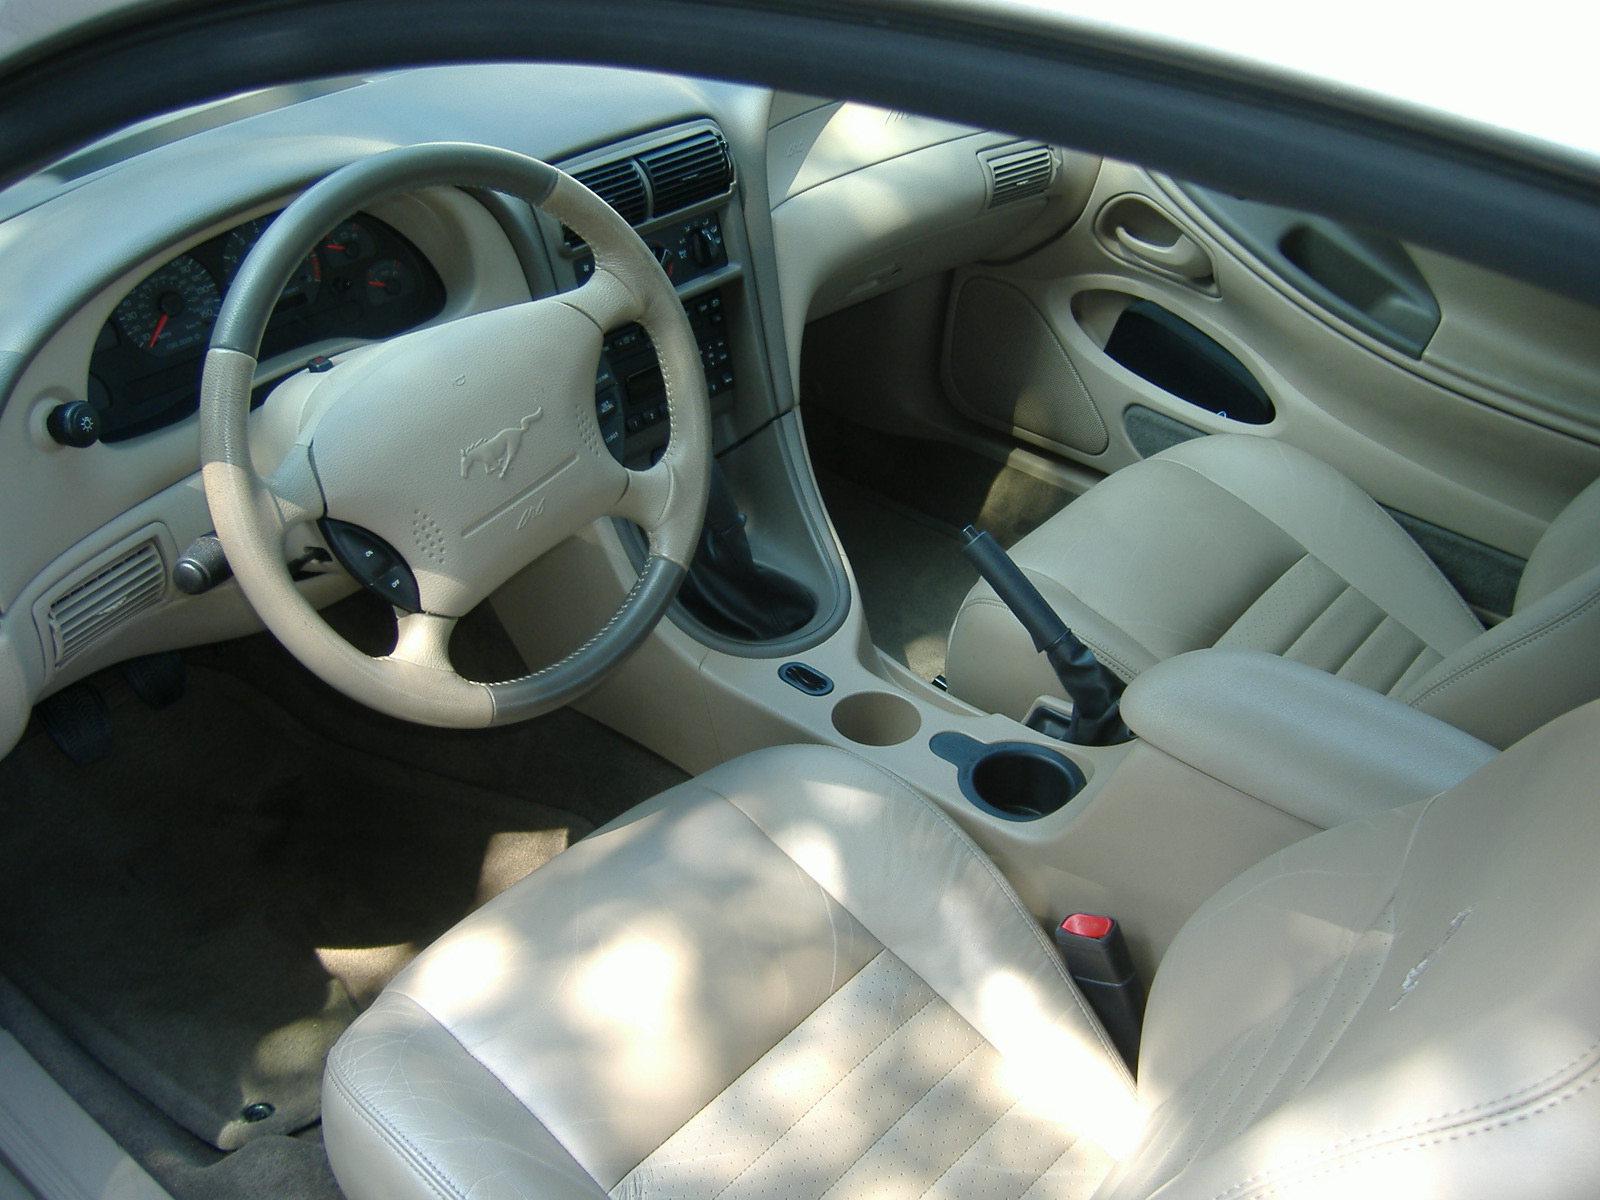 2002 Ford mustang gt seats #5